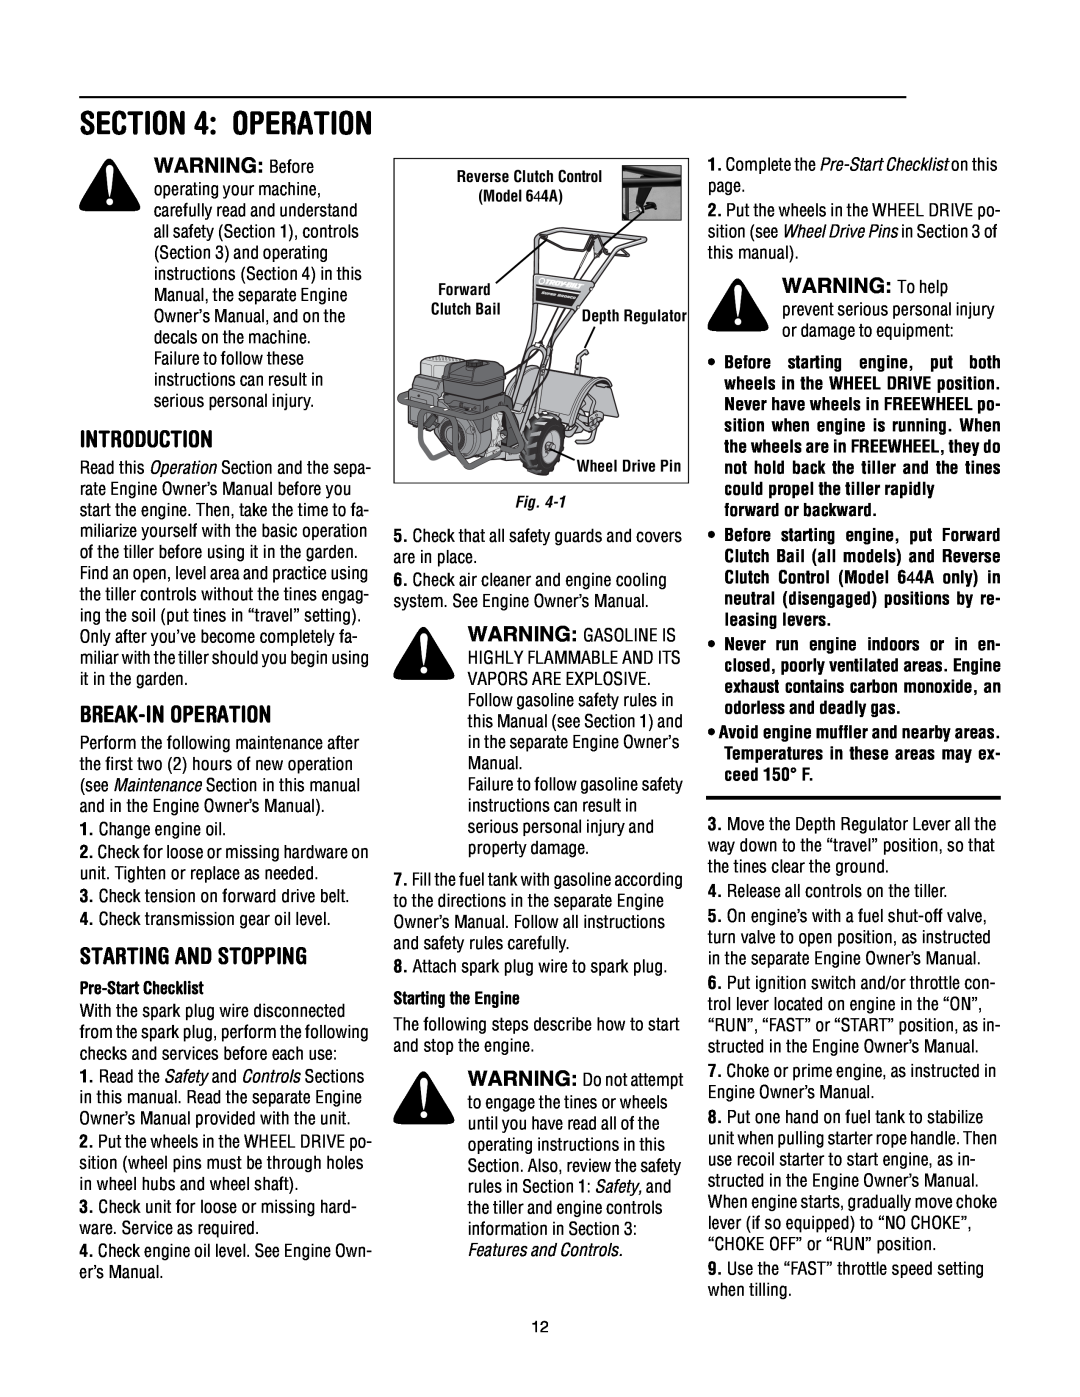 Troy-Bilt 640C-Tuffy Break-In Operation, Starting And Stopping, WARNING To help, Pre-Start Checklist, Starting the Engine 